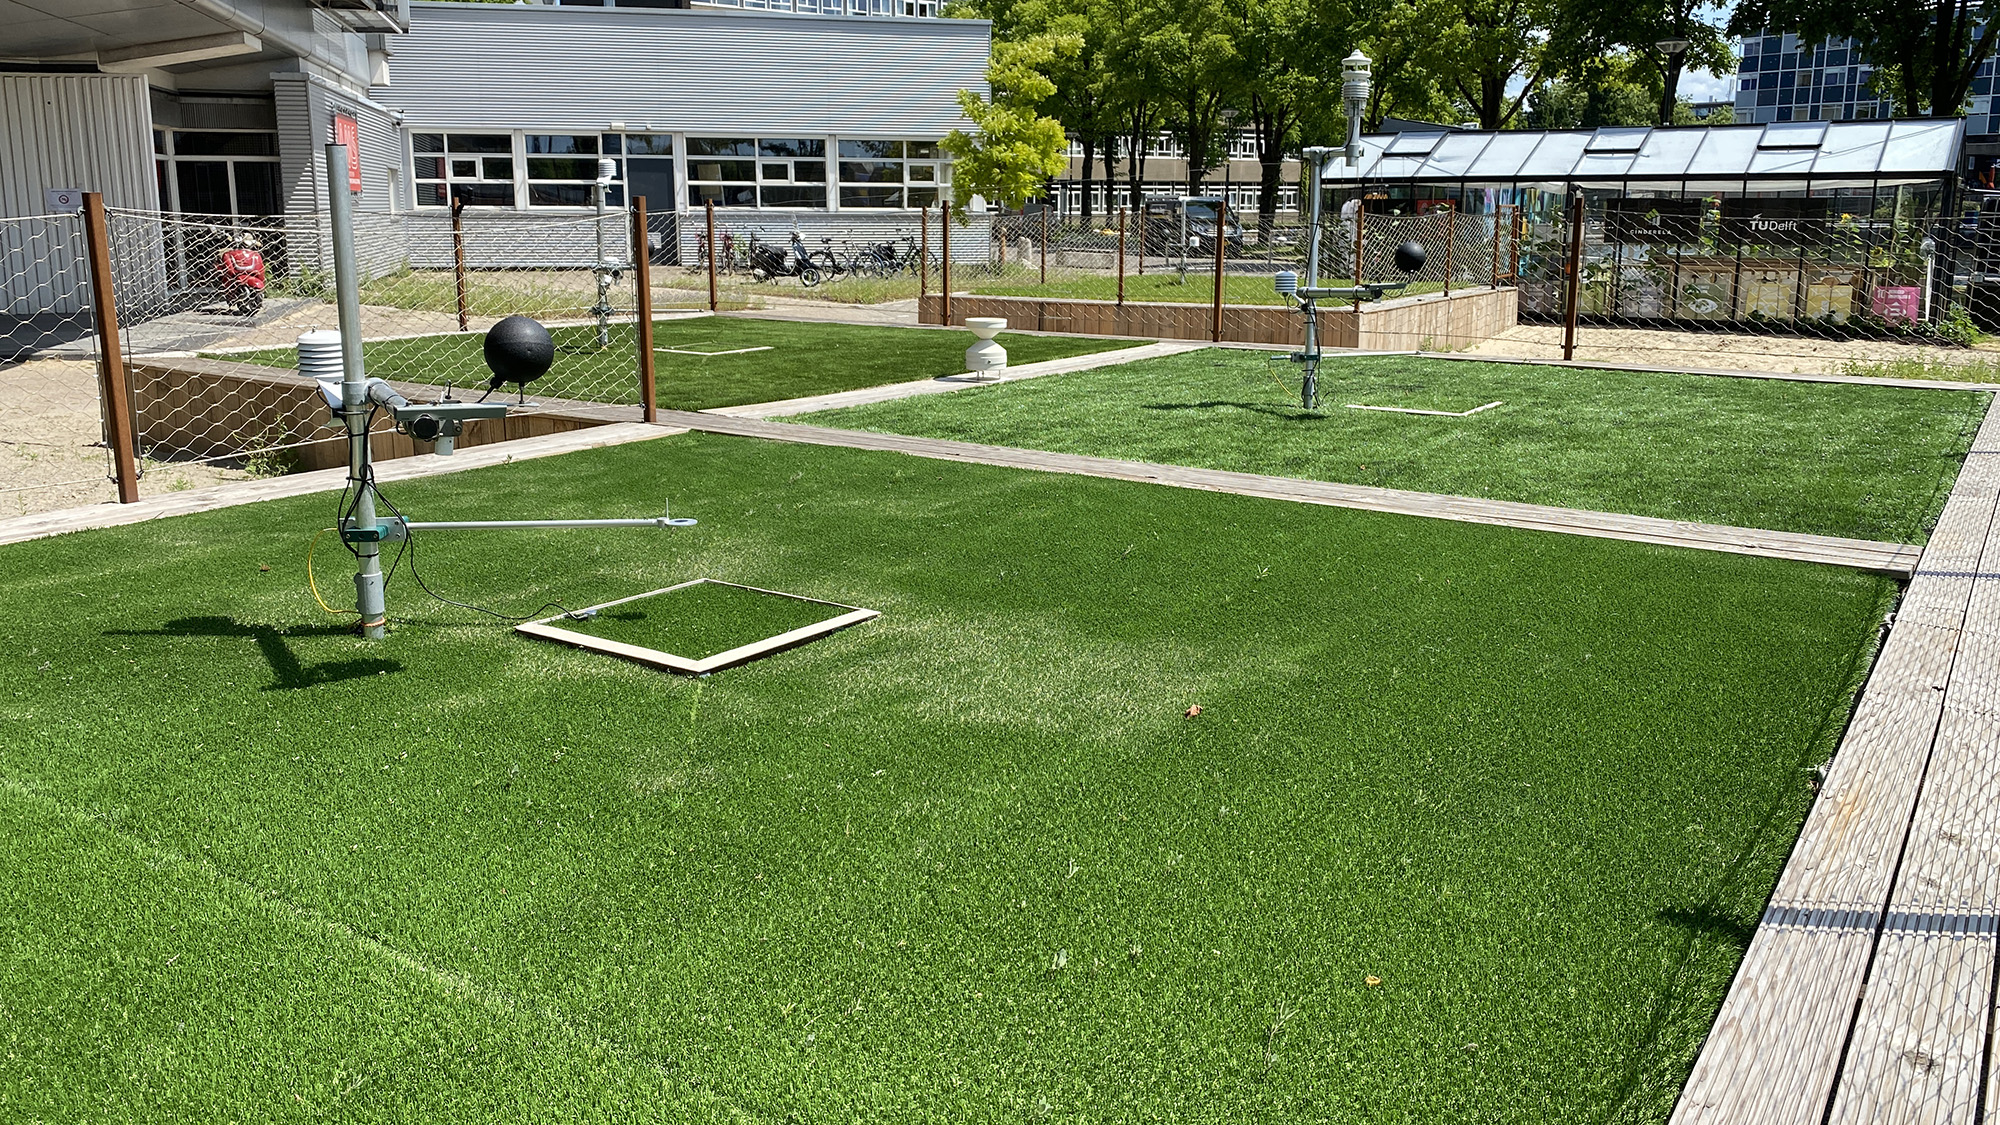 Self-cooling artificial grass can make sultry sports more bearable